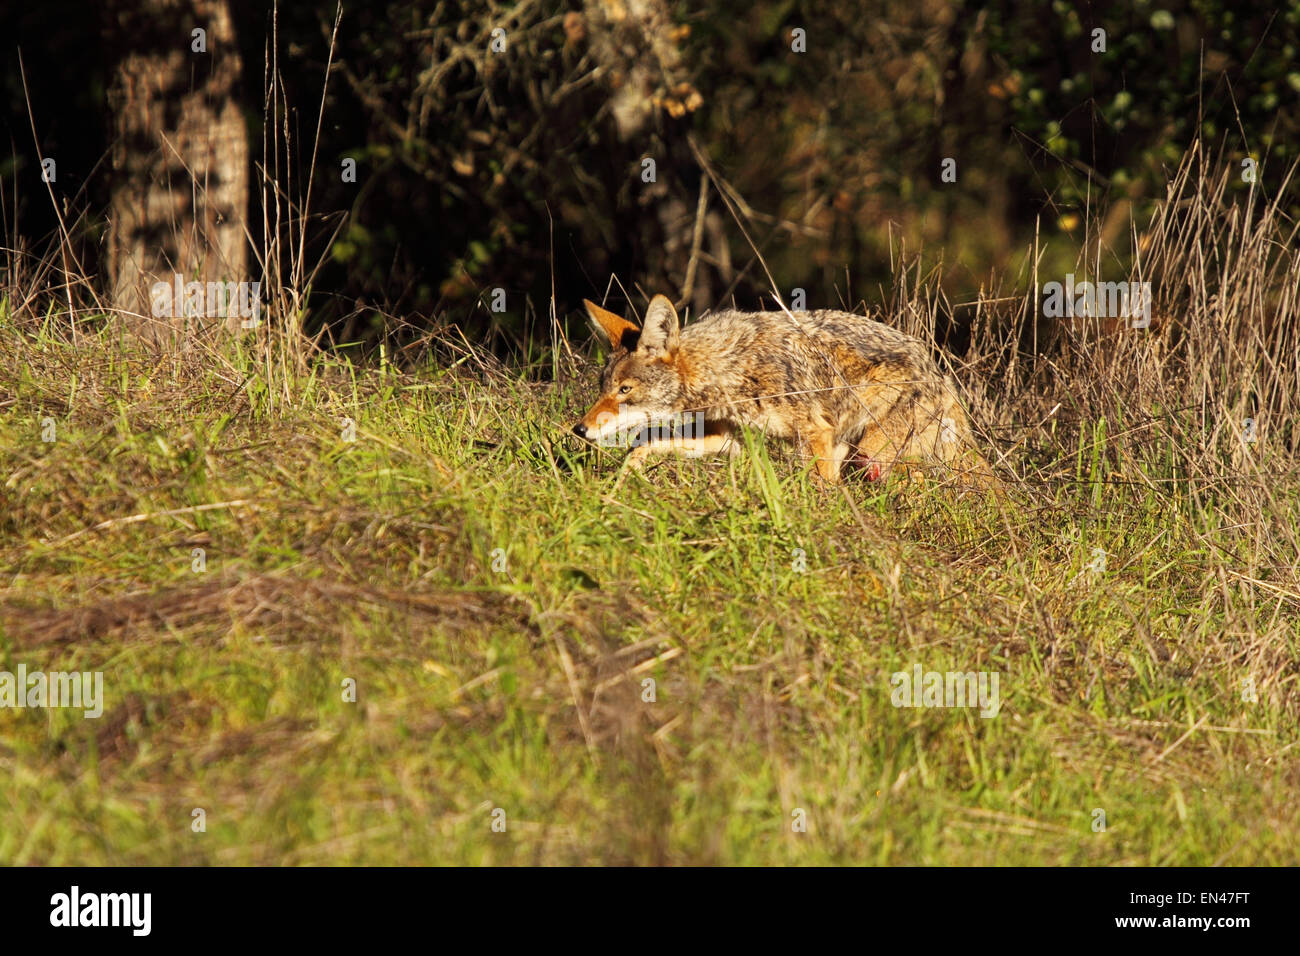 A Coyote sneaking through a field. Stock Photo